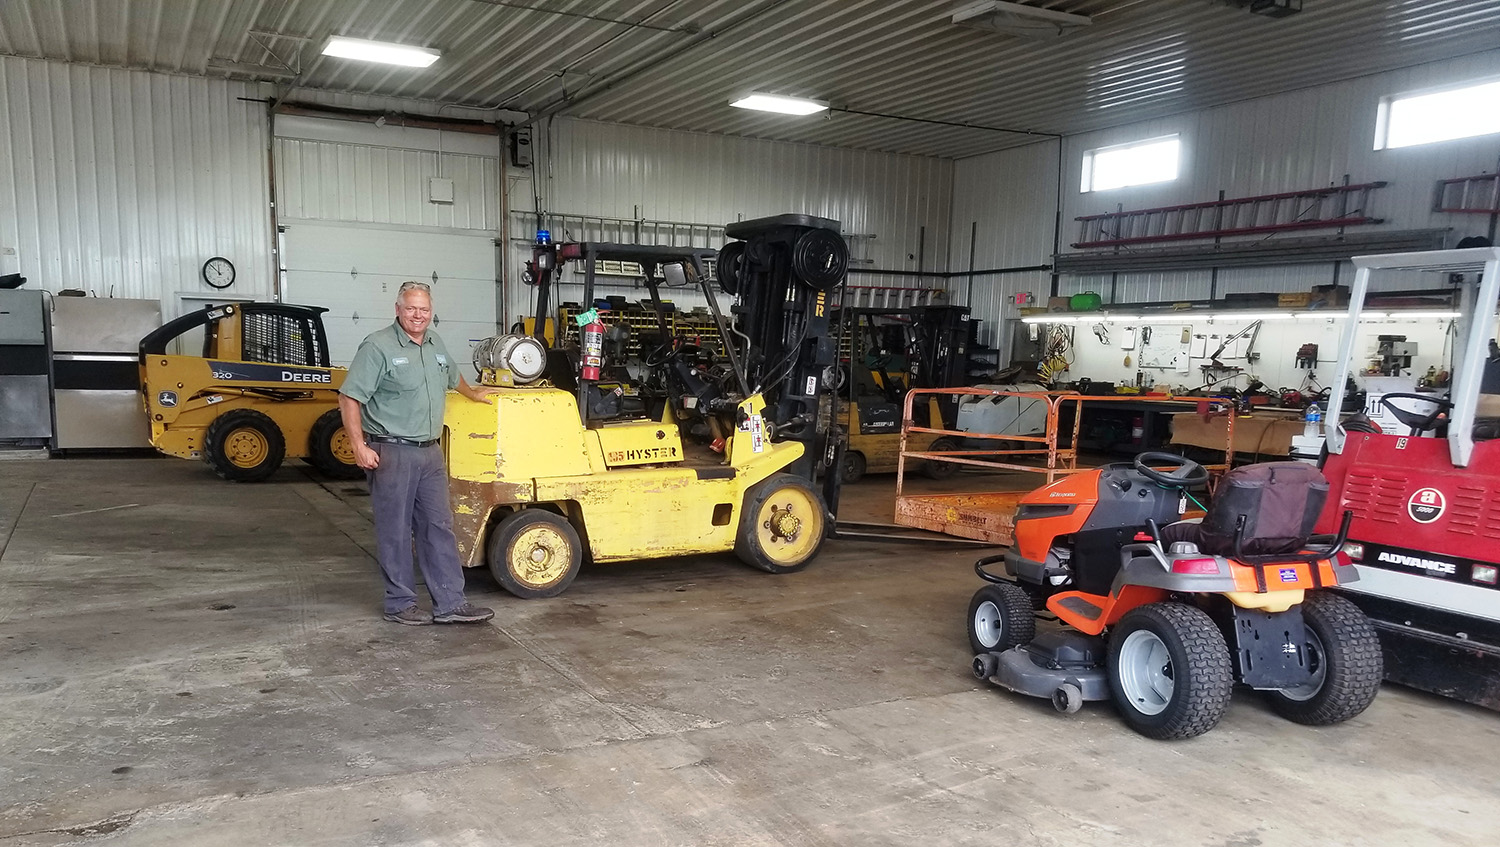 Chicago Rental & Repair owner Perry posing inside shop with forklifts and other equipment to be repaired - Lincoln, IL